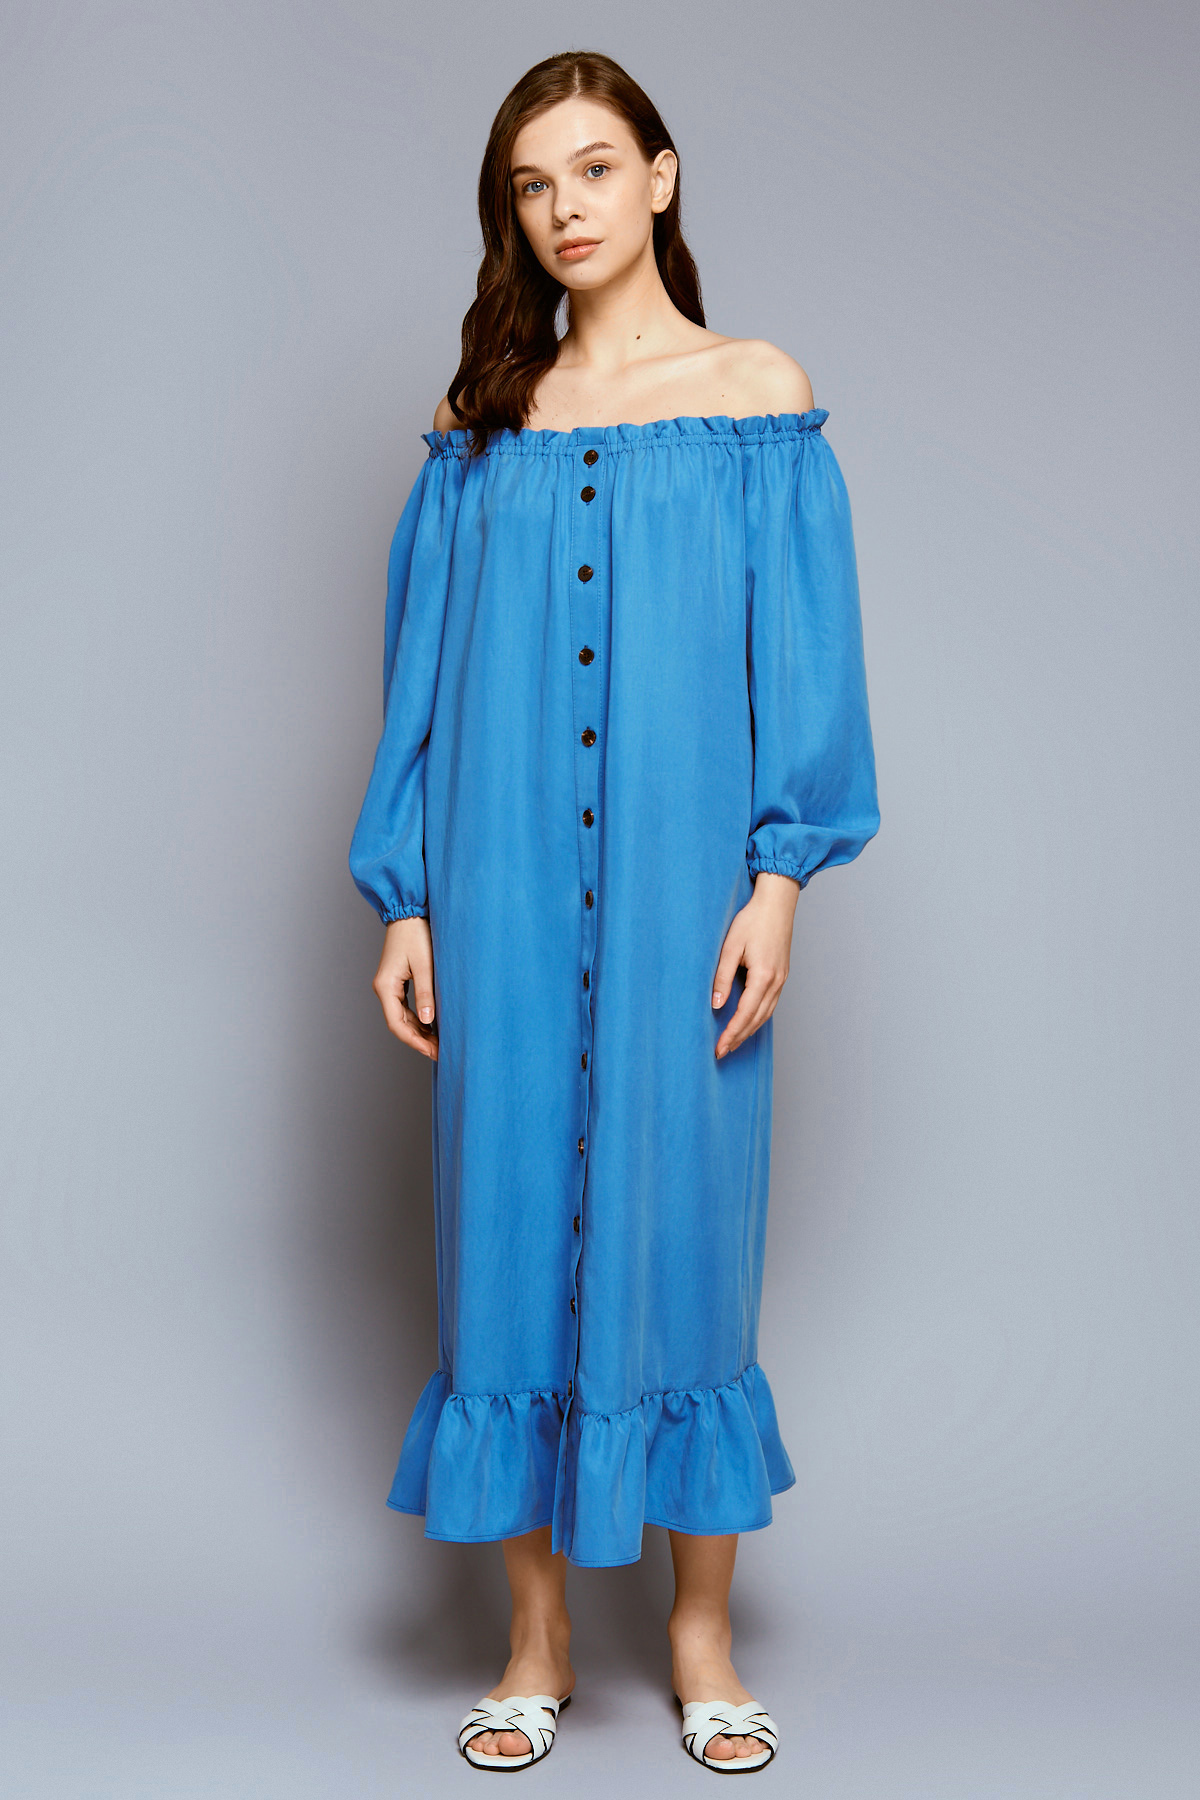 Blue midi dress with buttons elastic neckline and ruffles, photo 1